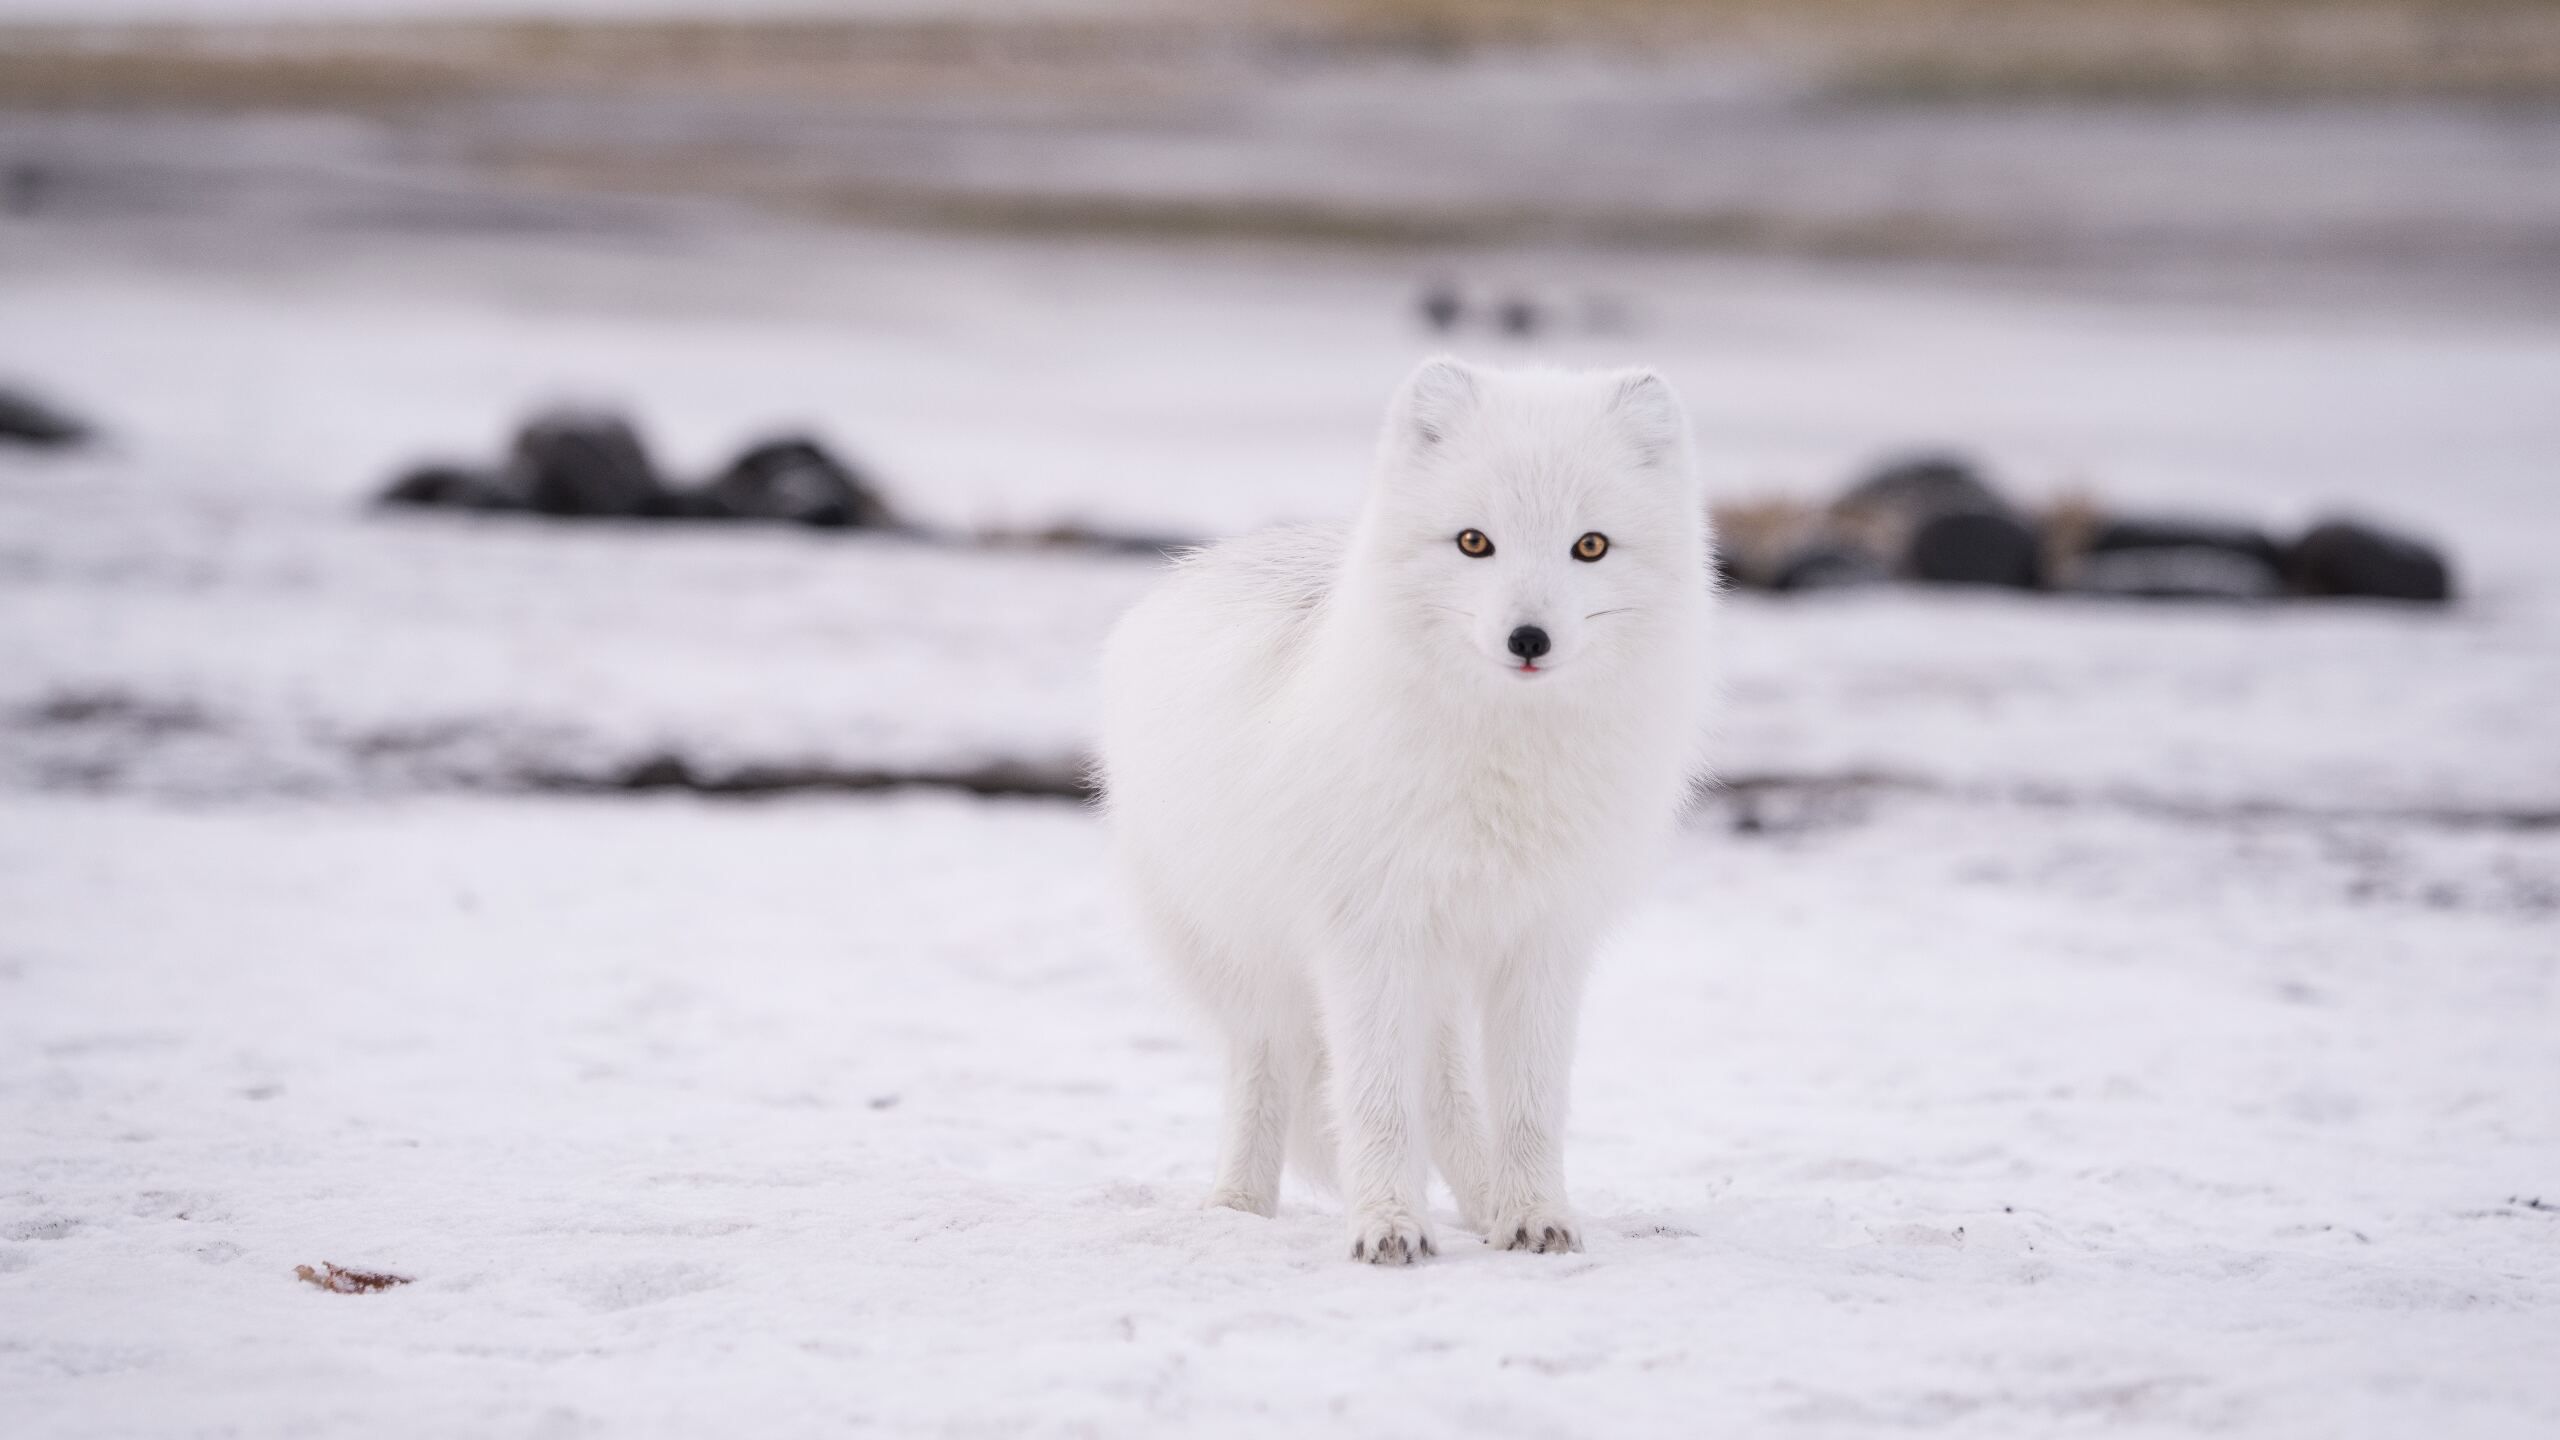 An Arctic fox stands in the snow. - Eyes